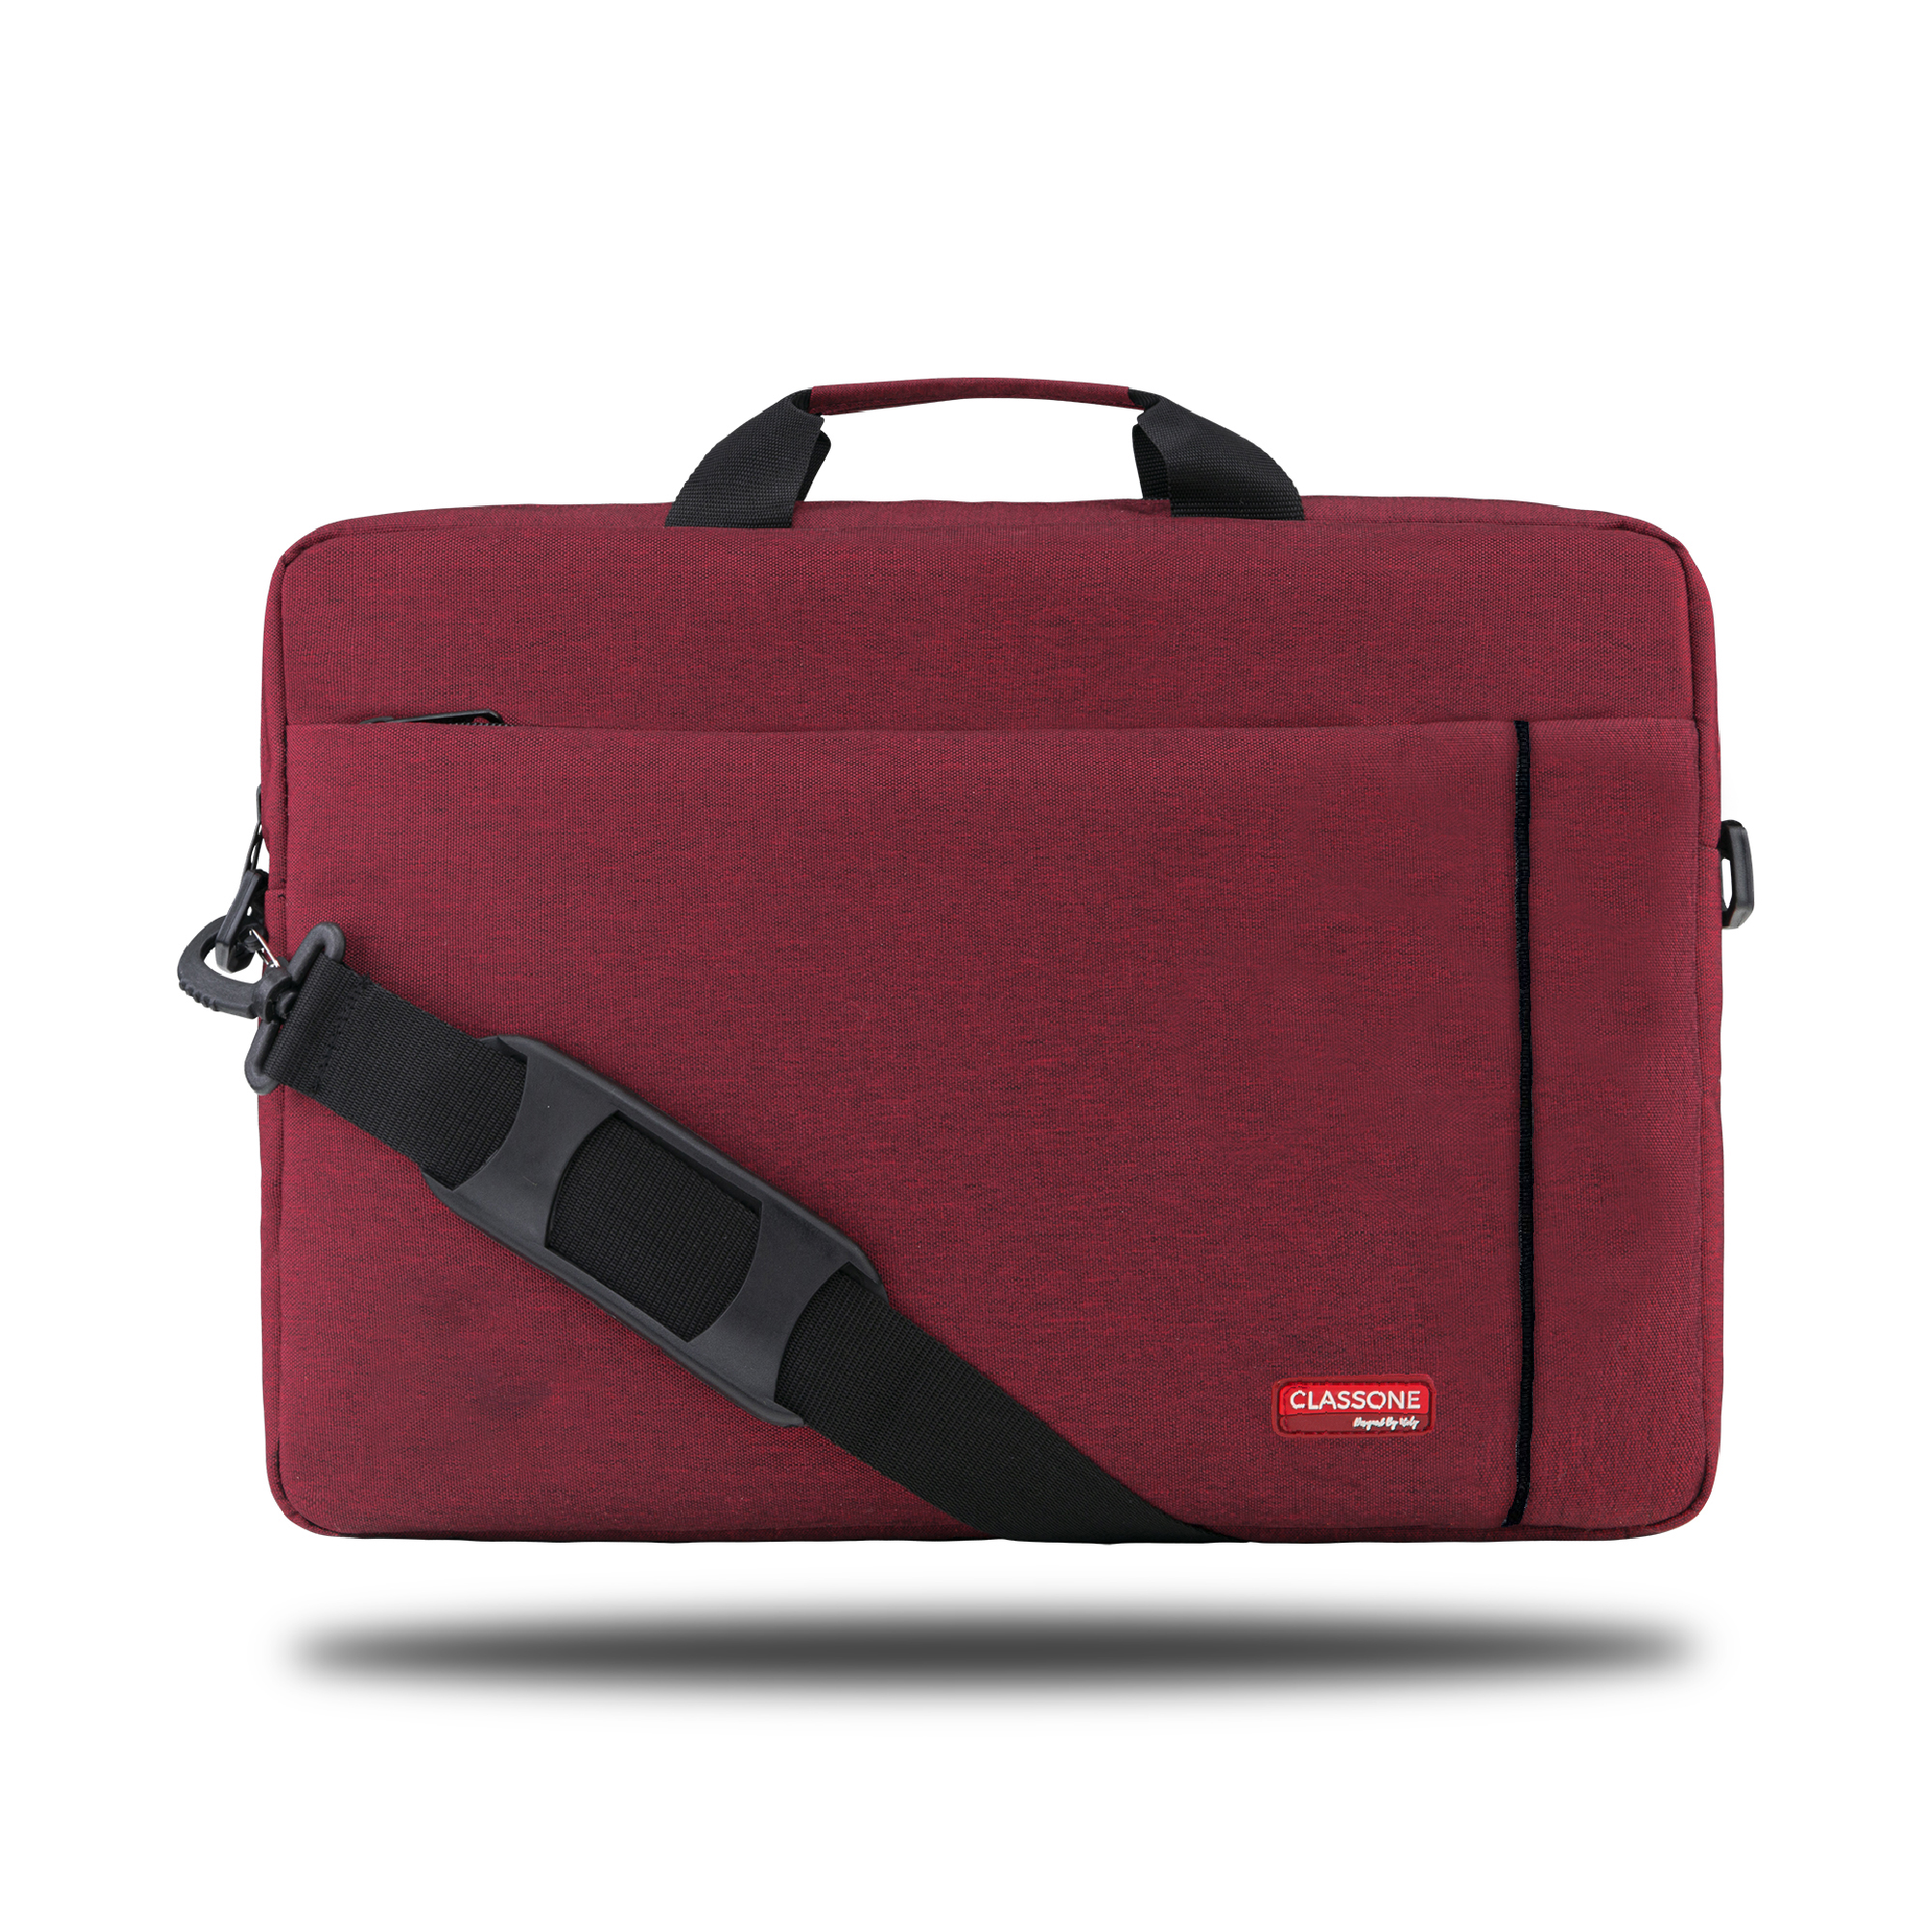 Classone BND705 WorkStation4 Series WTXpro Waterproof Fabric 15.6 inch Laptop, Notebook Bag- Claret Red